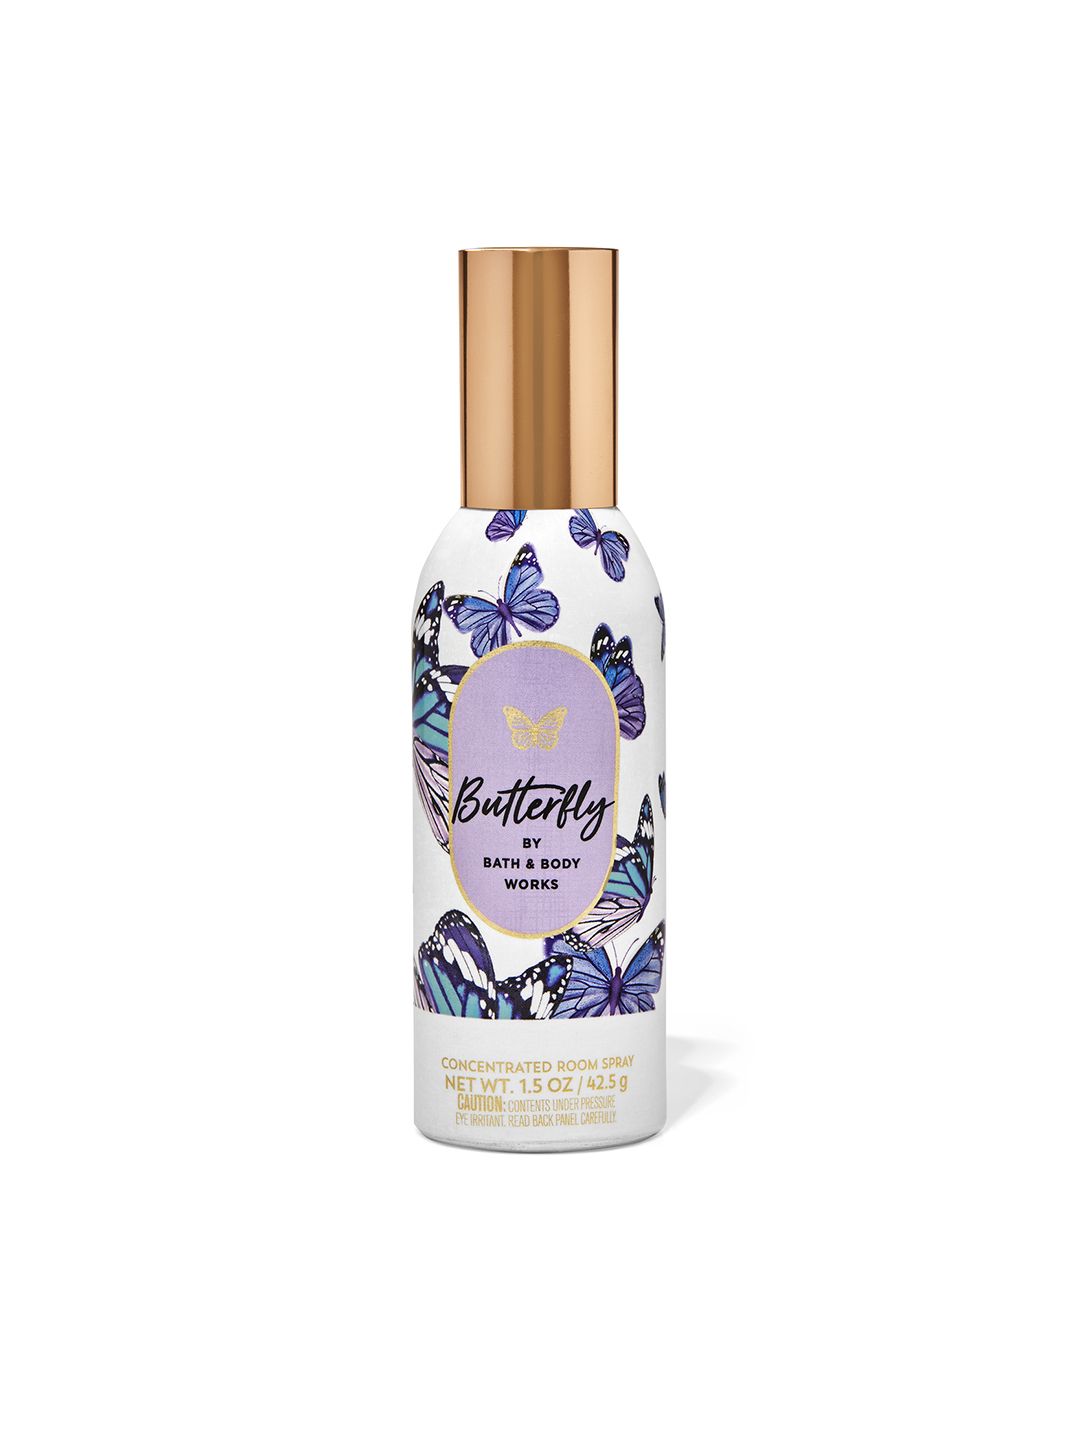 Bath & Body Works Butterfly Concentrated Room Spray - 42.5 g Price in India